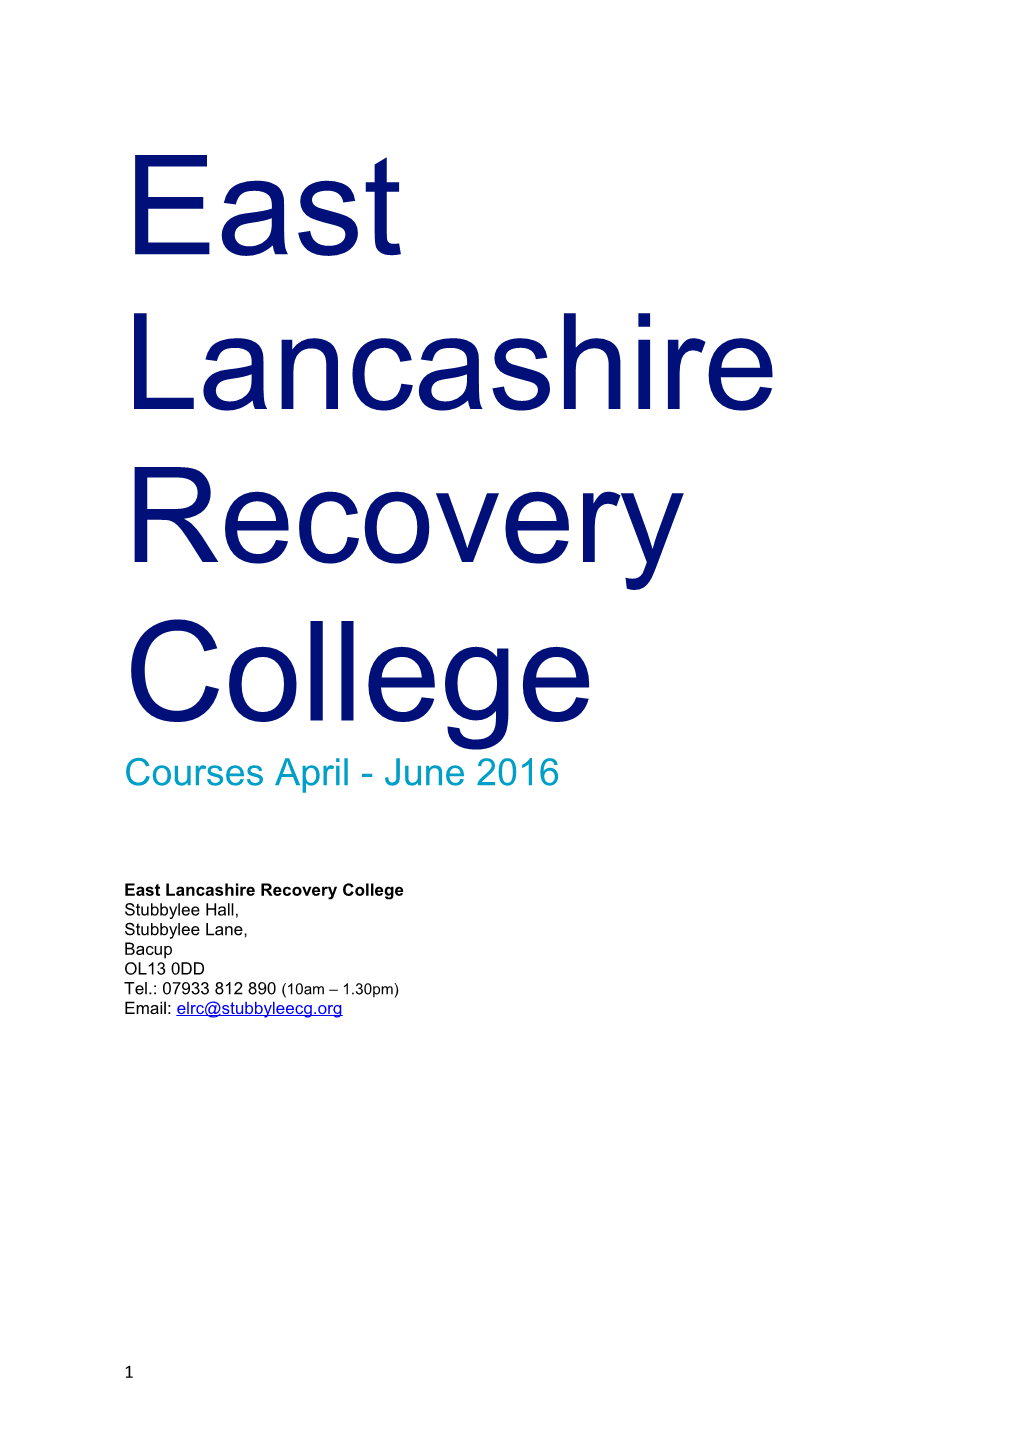 East Lancashire Recovery College